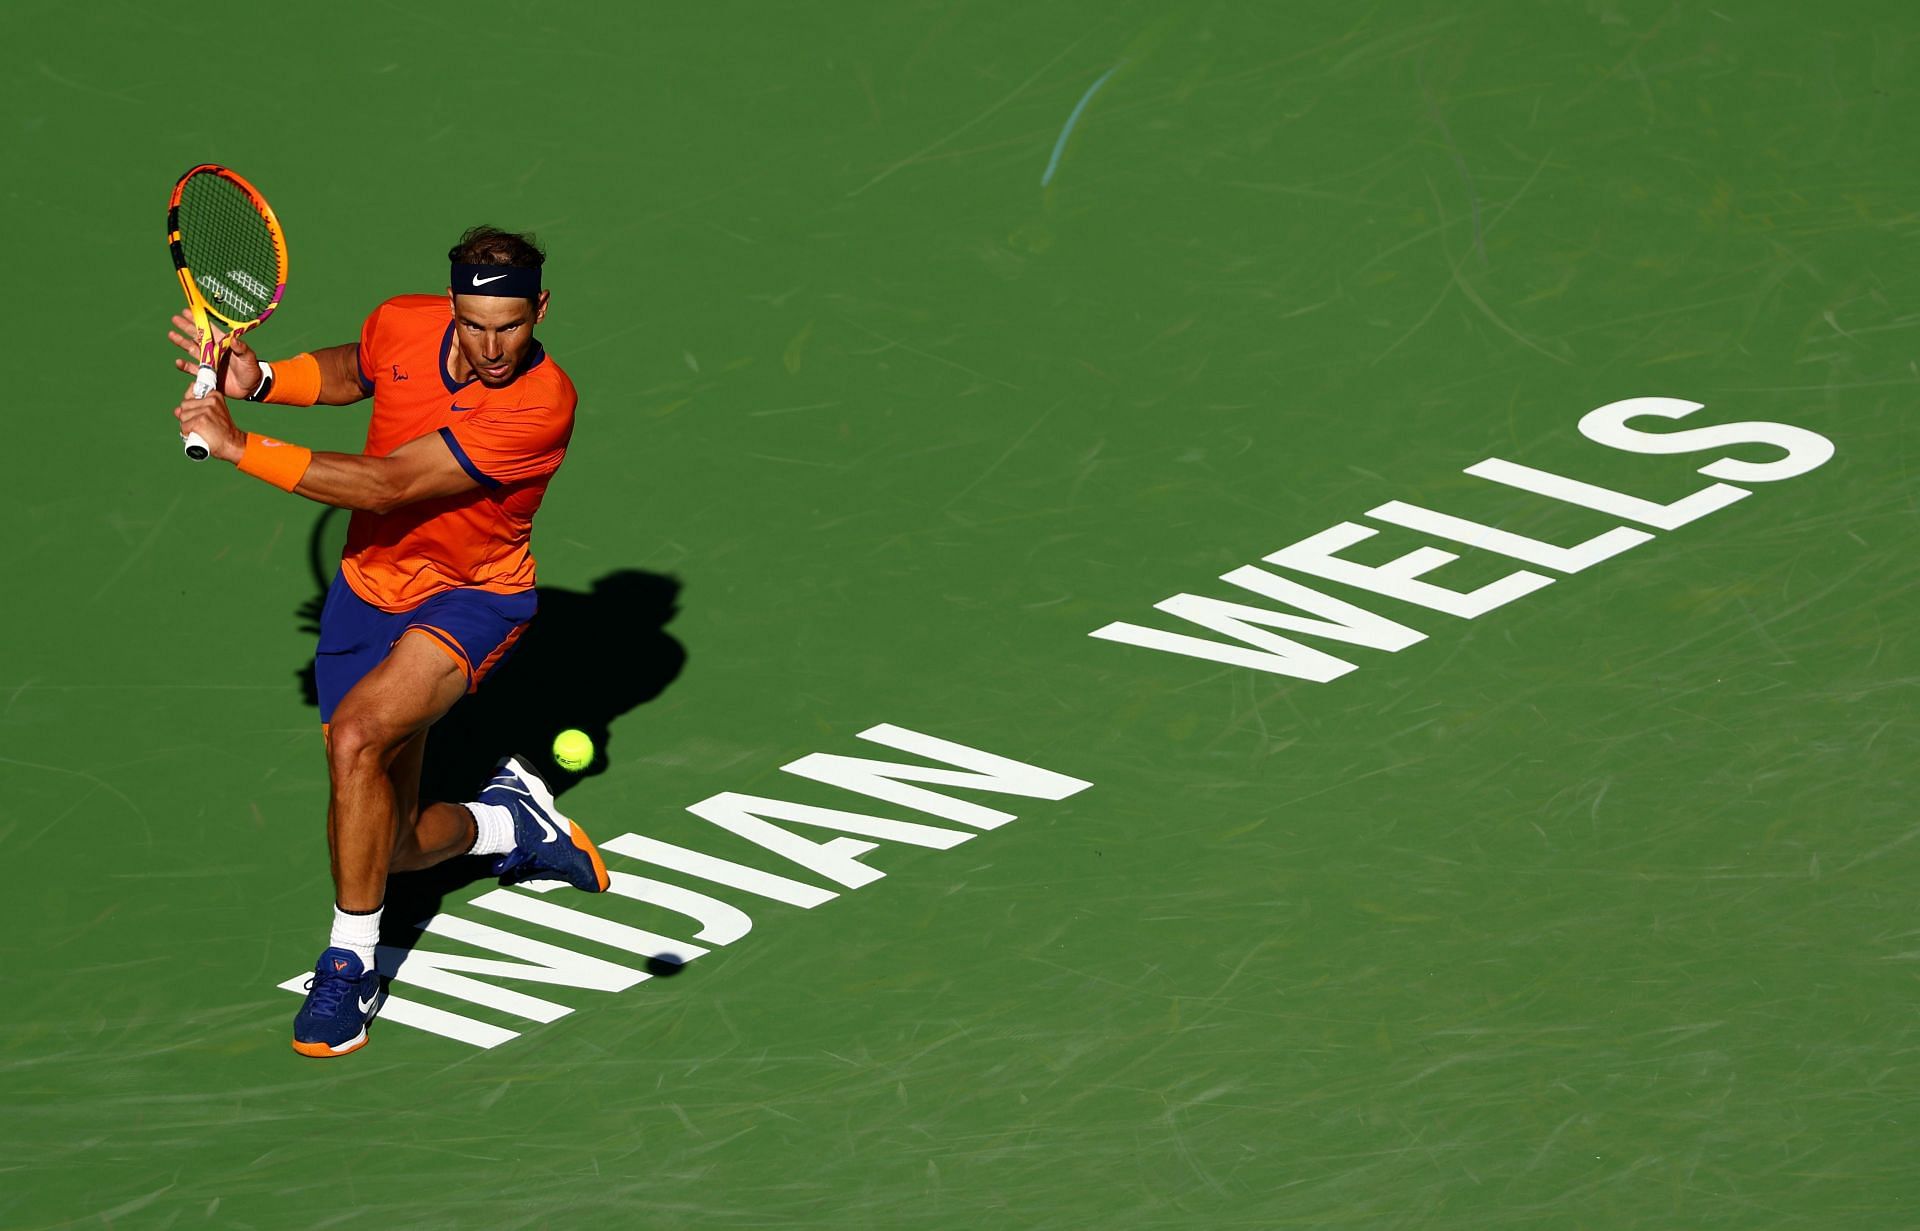 Nadal overcame Korda in the second-round BNP Paribas Open encounter.